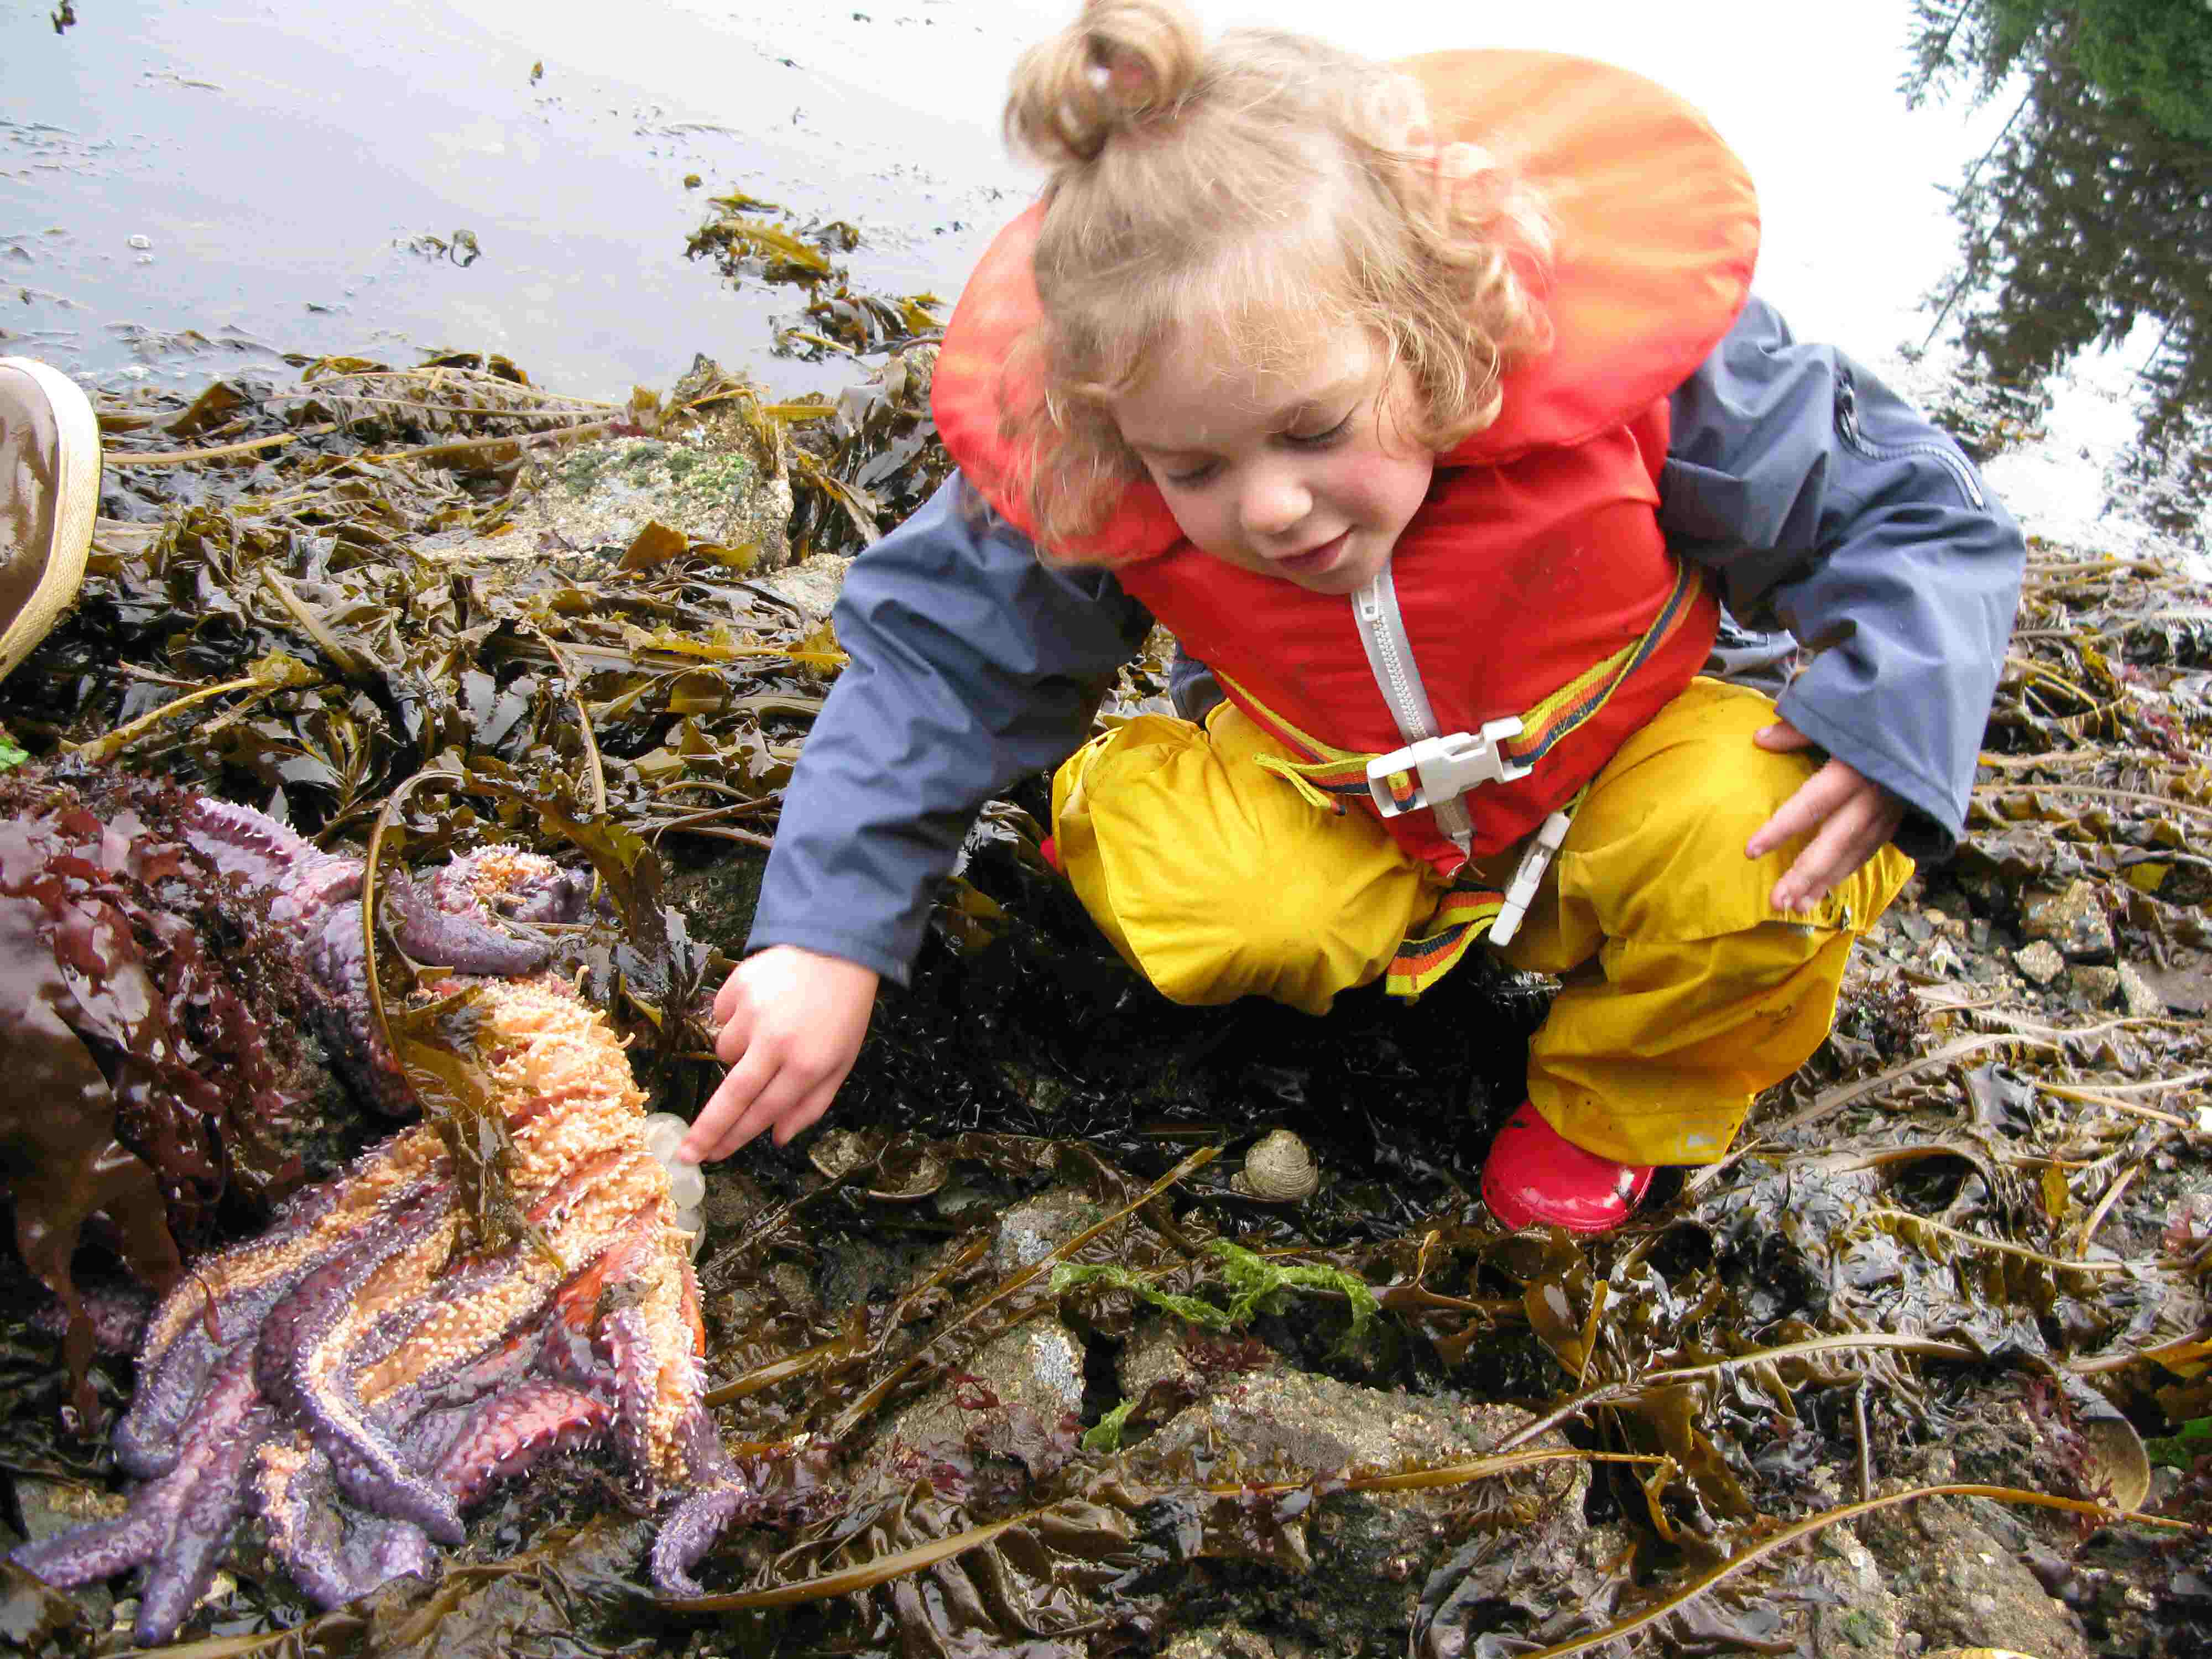 Kachemak Bay tidepool discovery tour, observing the stomach of starfish